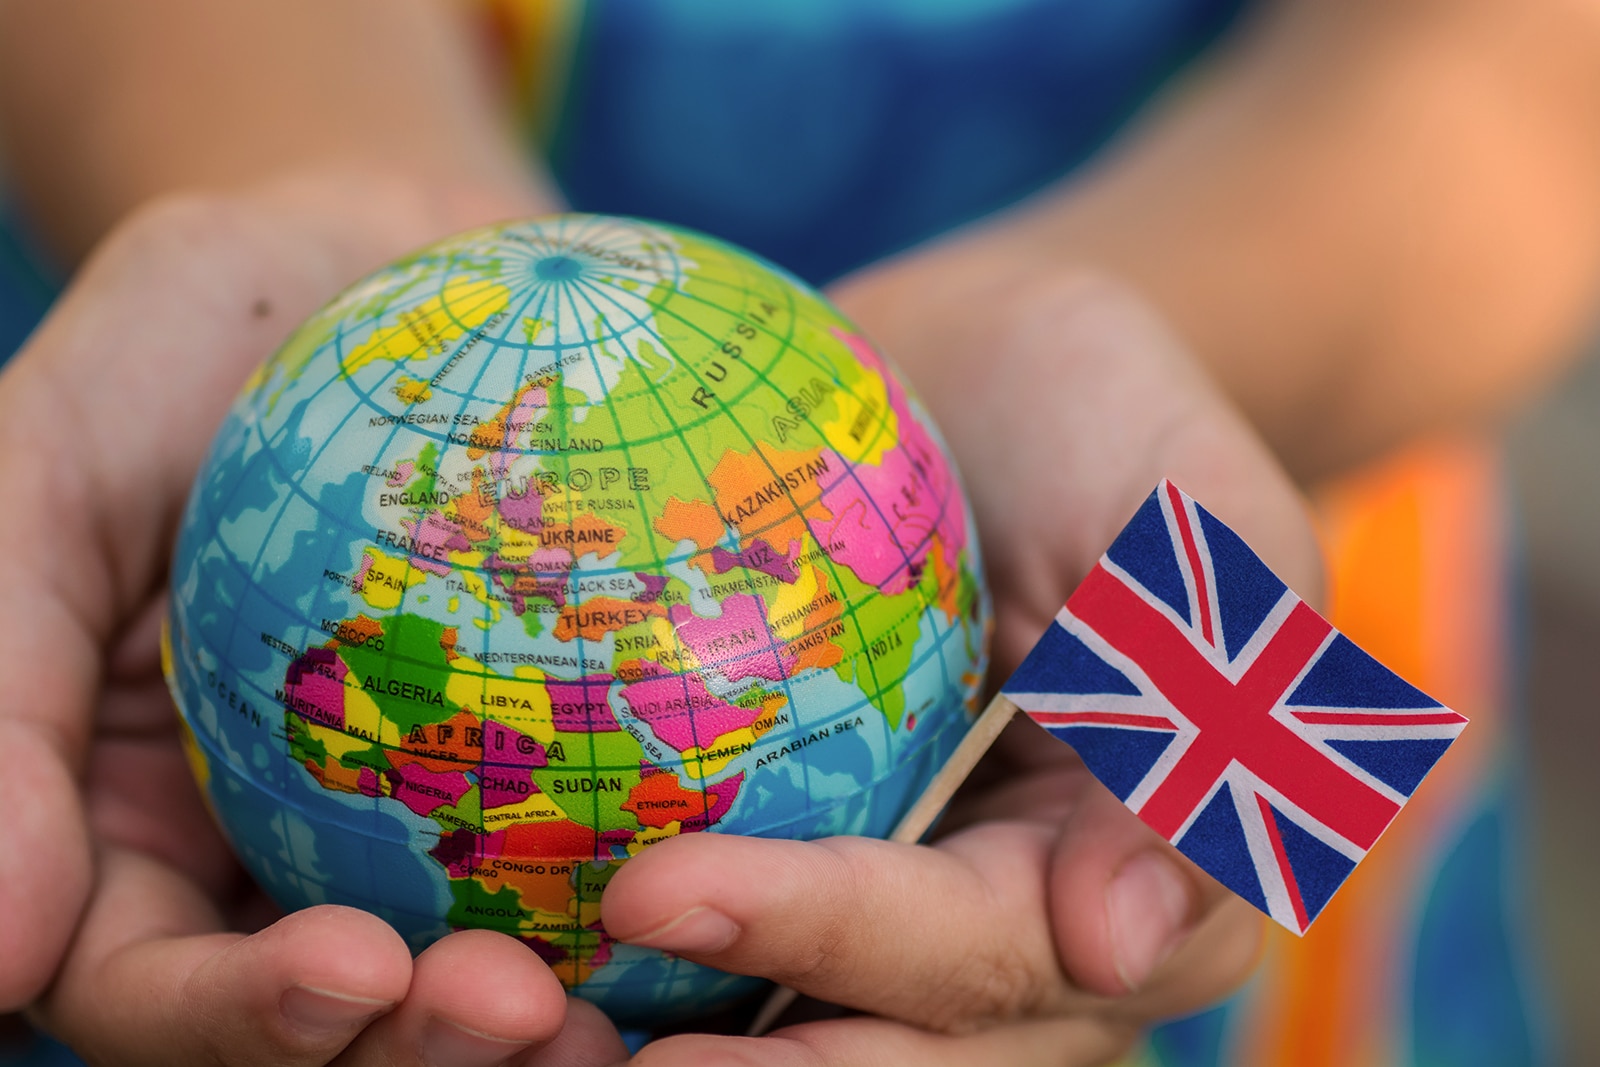 Hands holding a mini globe and small union jack